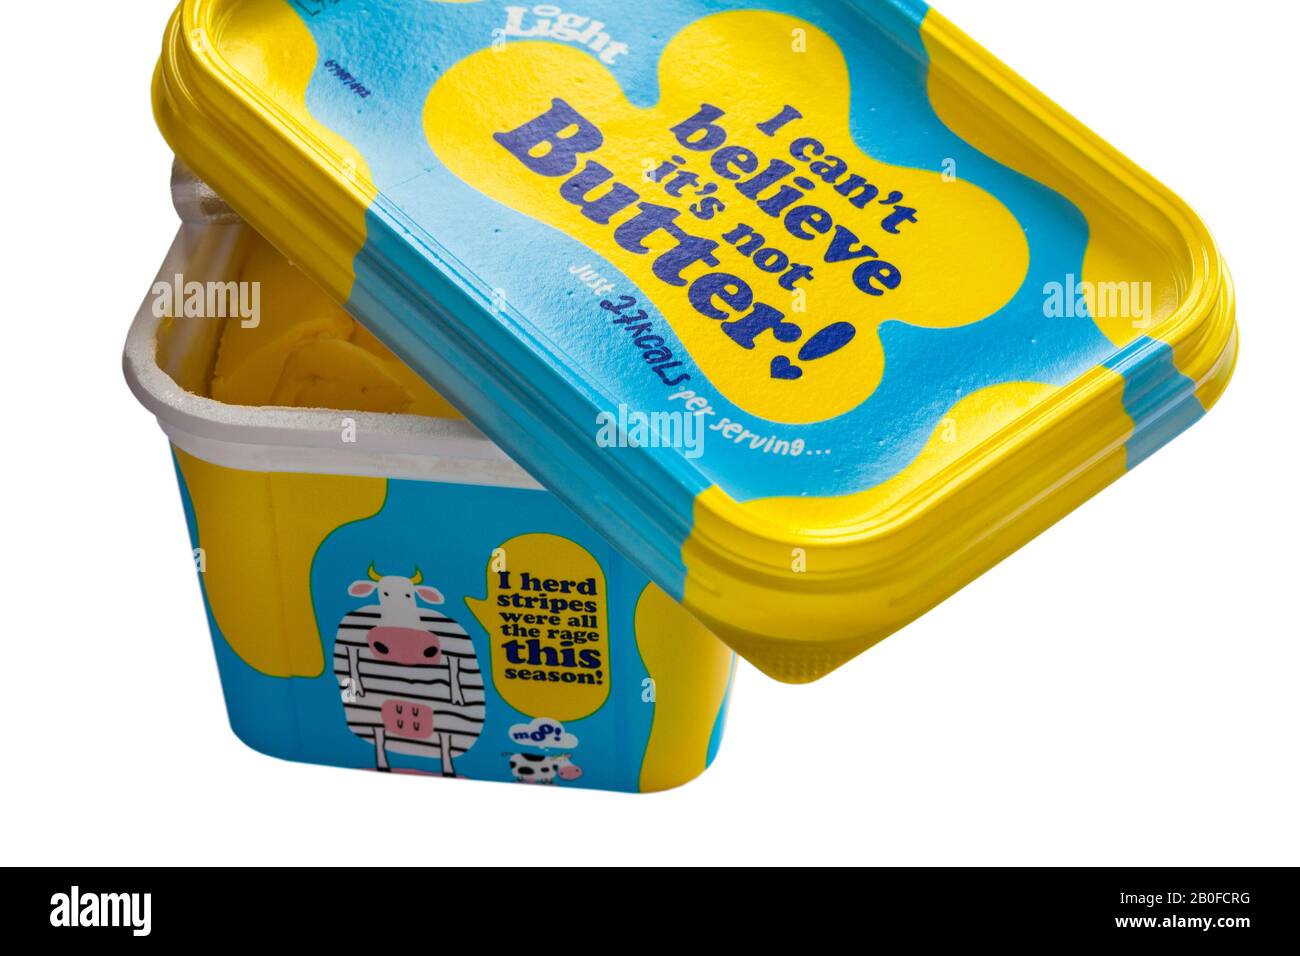 tub of I can't believe it's not butter Light, I herd stripes were all the rage this season set on white background Stock Photo